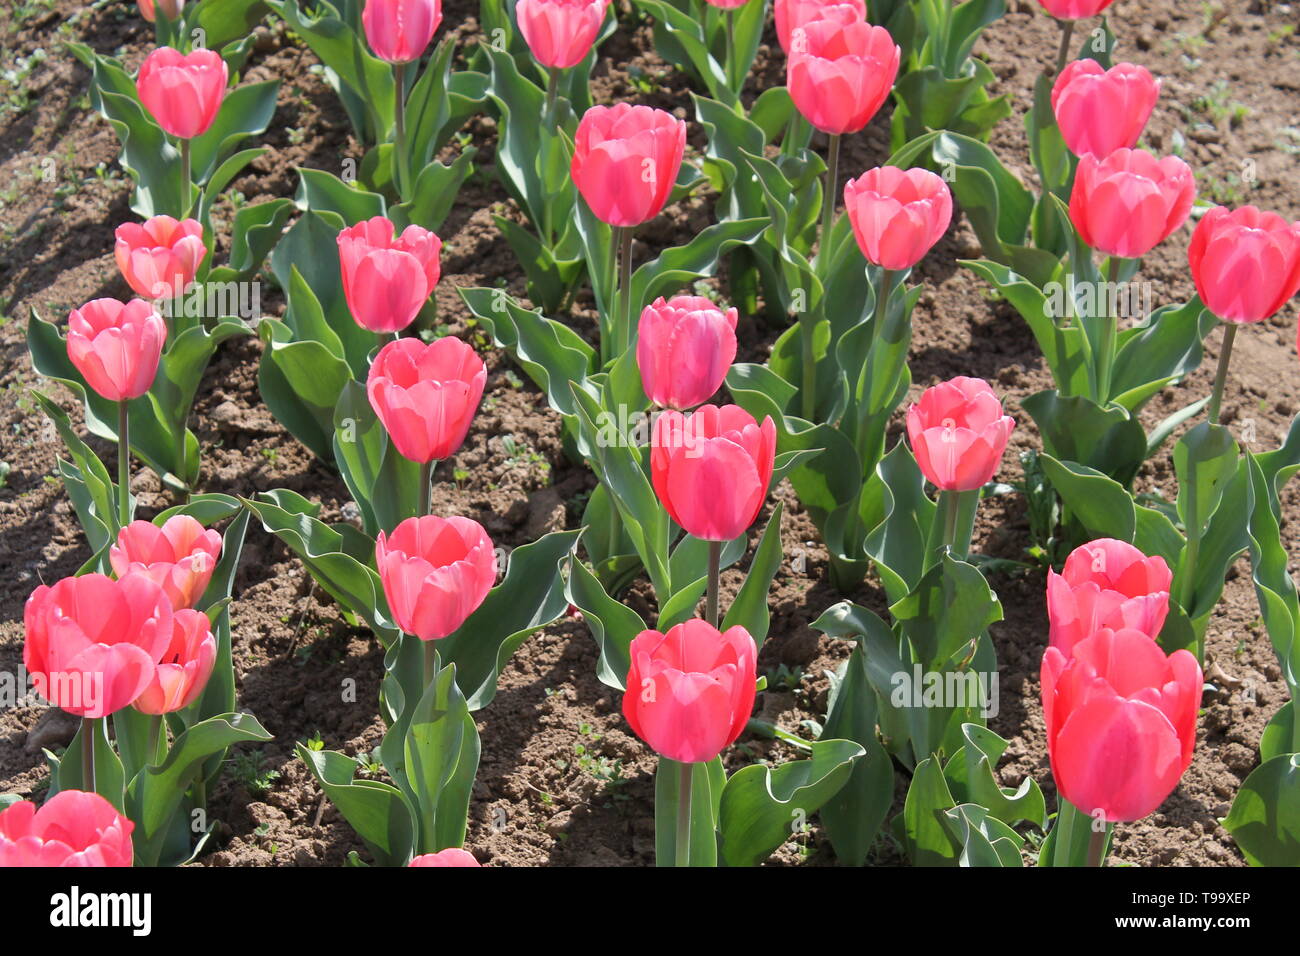 The Tulip garden at Srinagar India opens in the month of April and last for one month. Its worth seeing the magical flowers. Stock Photo